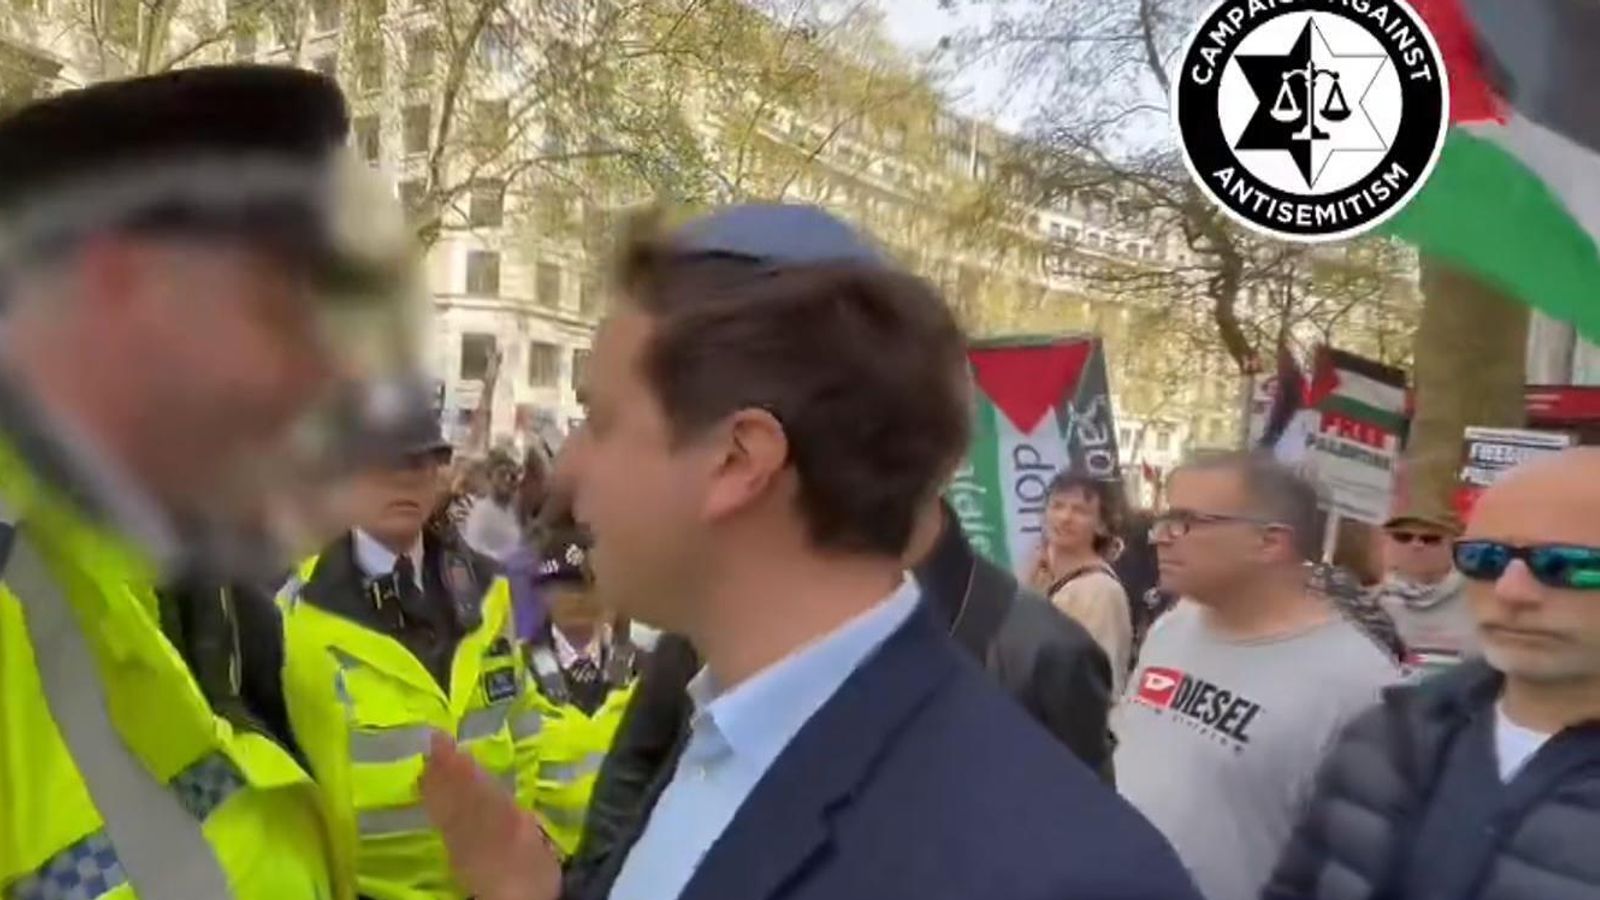 PM 'appalled' at Met Police 'openly Jewish' exchange - but Sadiq Khan has full confidence in commissioner